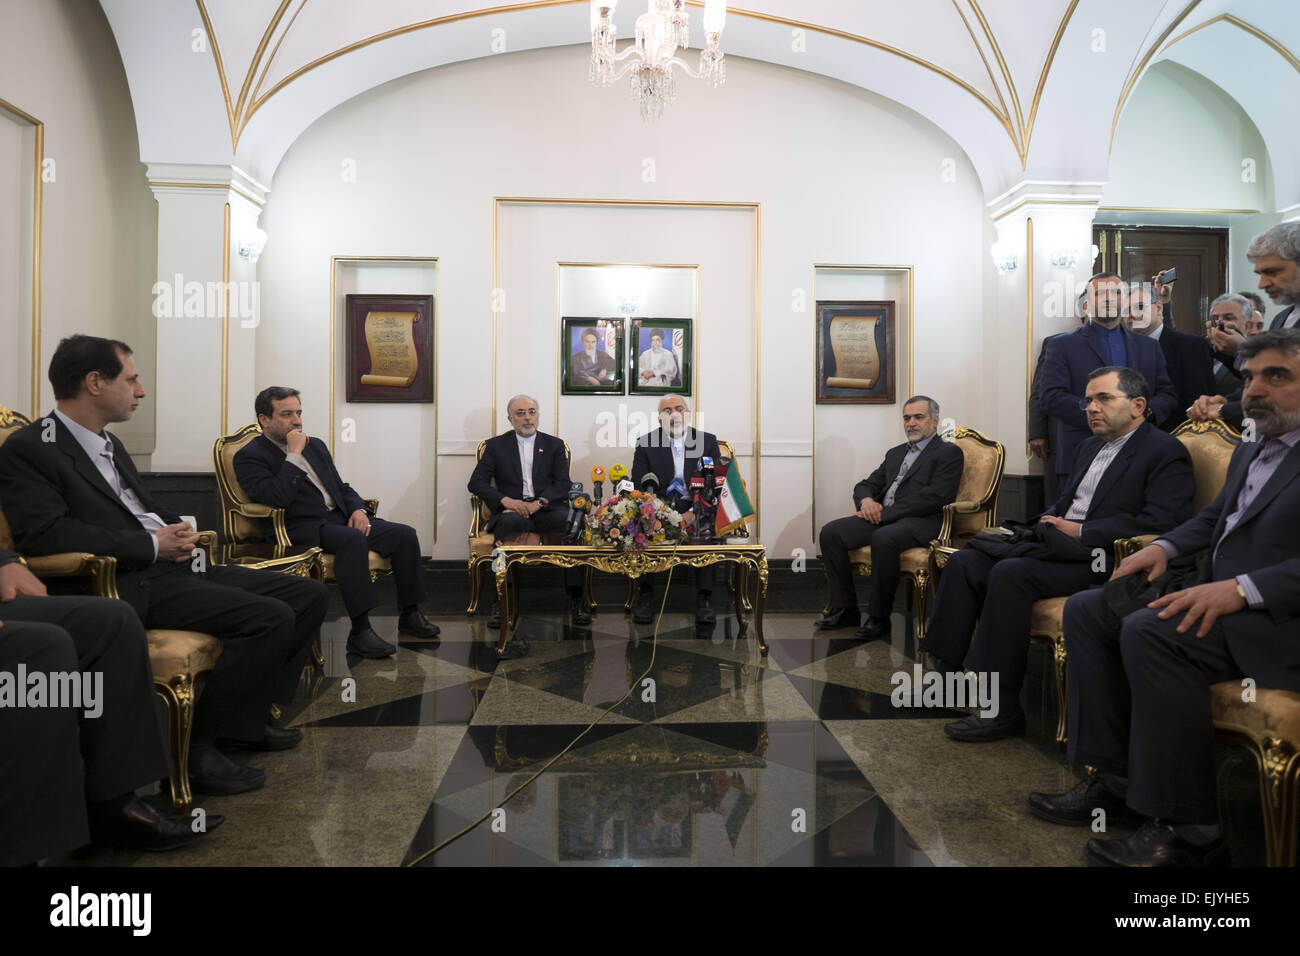 Tehran, Iran. 3rd Apr, 2015. Members of Iran's nuclear negotiation team with world powers in Lausanne, Foreign Minister MOHAMMAD JAVAD ZARIF (C-R), and The Head of Iran's Atomic Energy Organization, ALI AKBAR SALEHI (C-L) attend for speaking with media after arrive Tehran's Mehrabad airport.  Credit:  Morteza Nikoubazl/ZUMA Wire/Alamy Live News Stock Photo